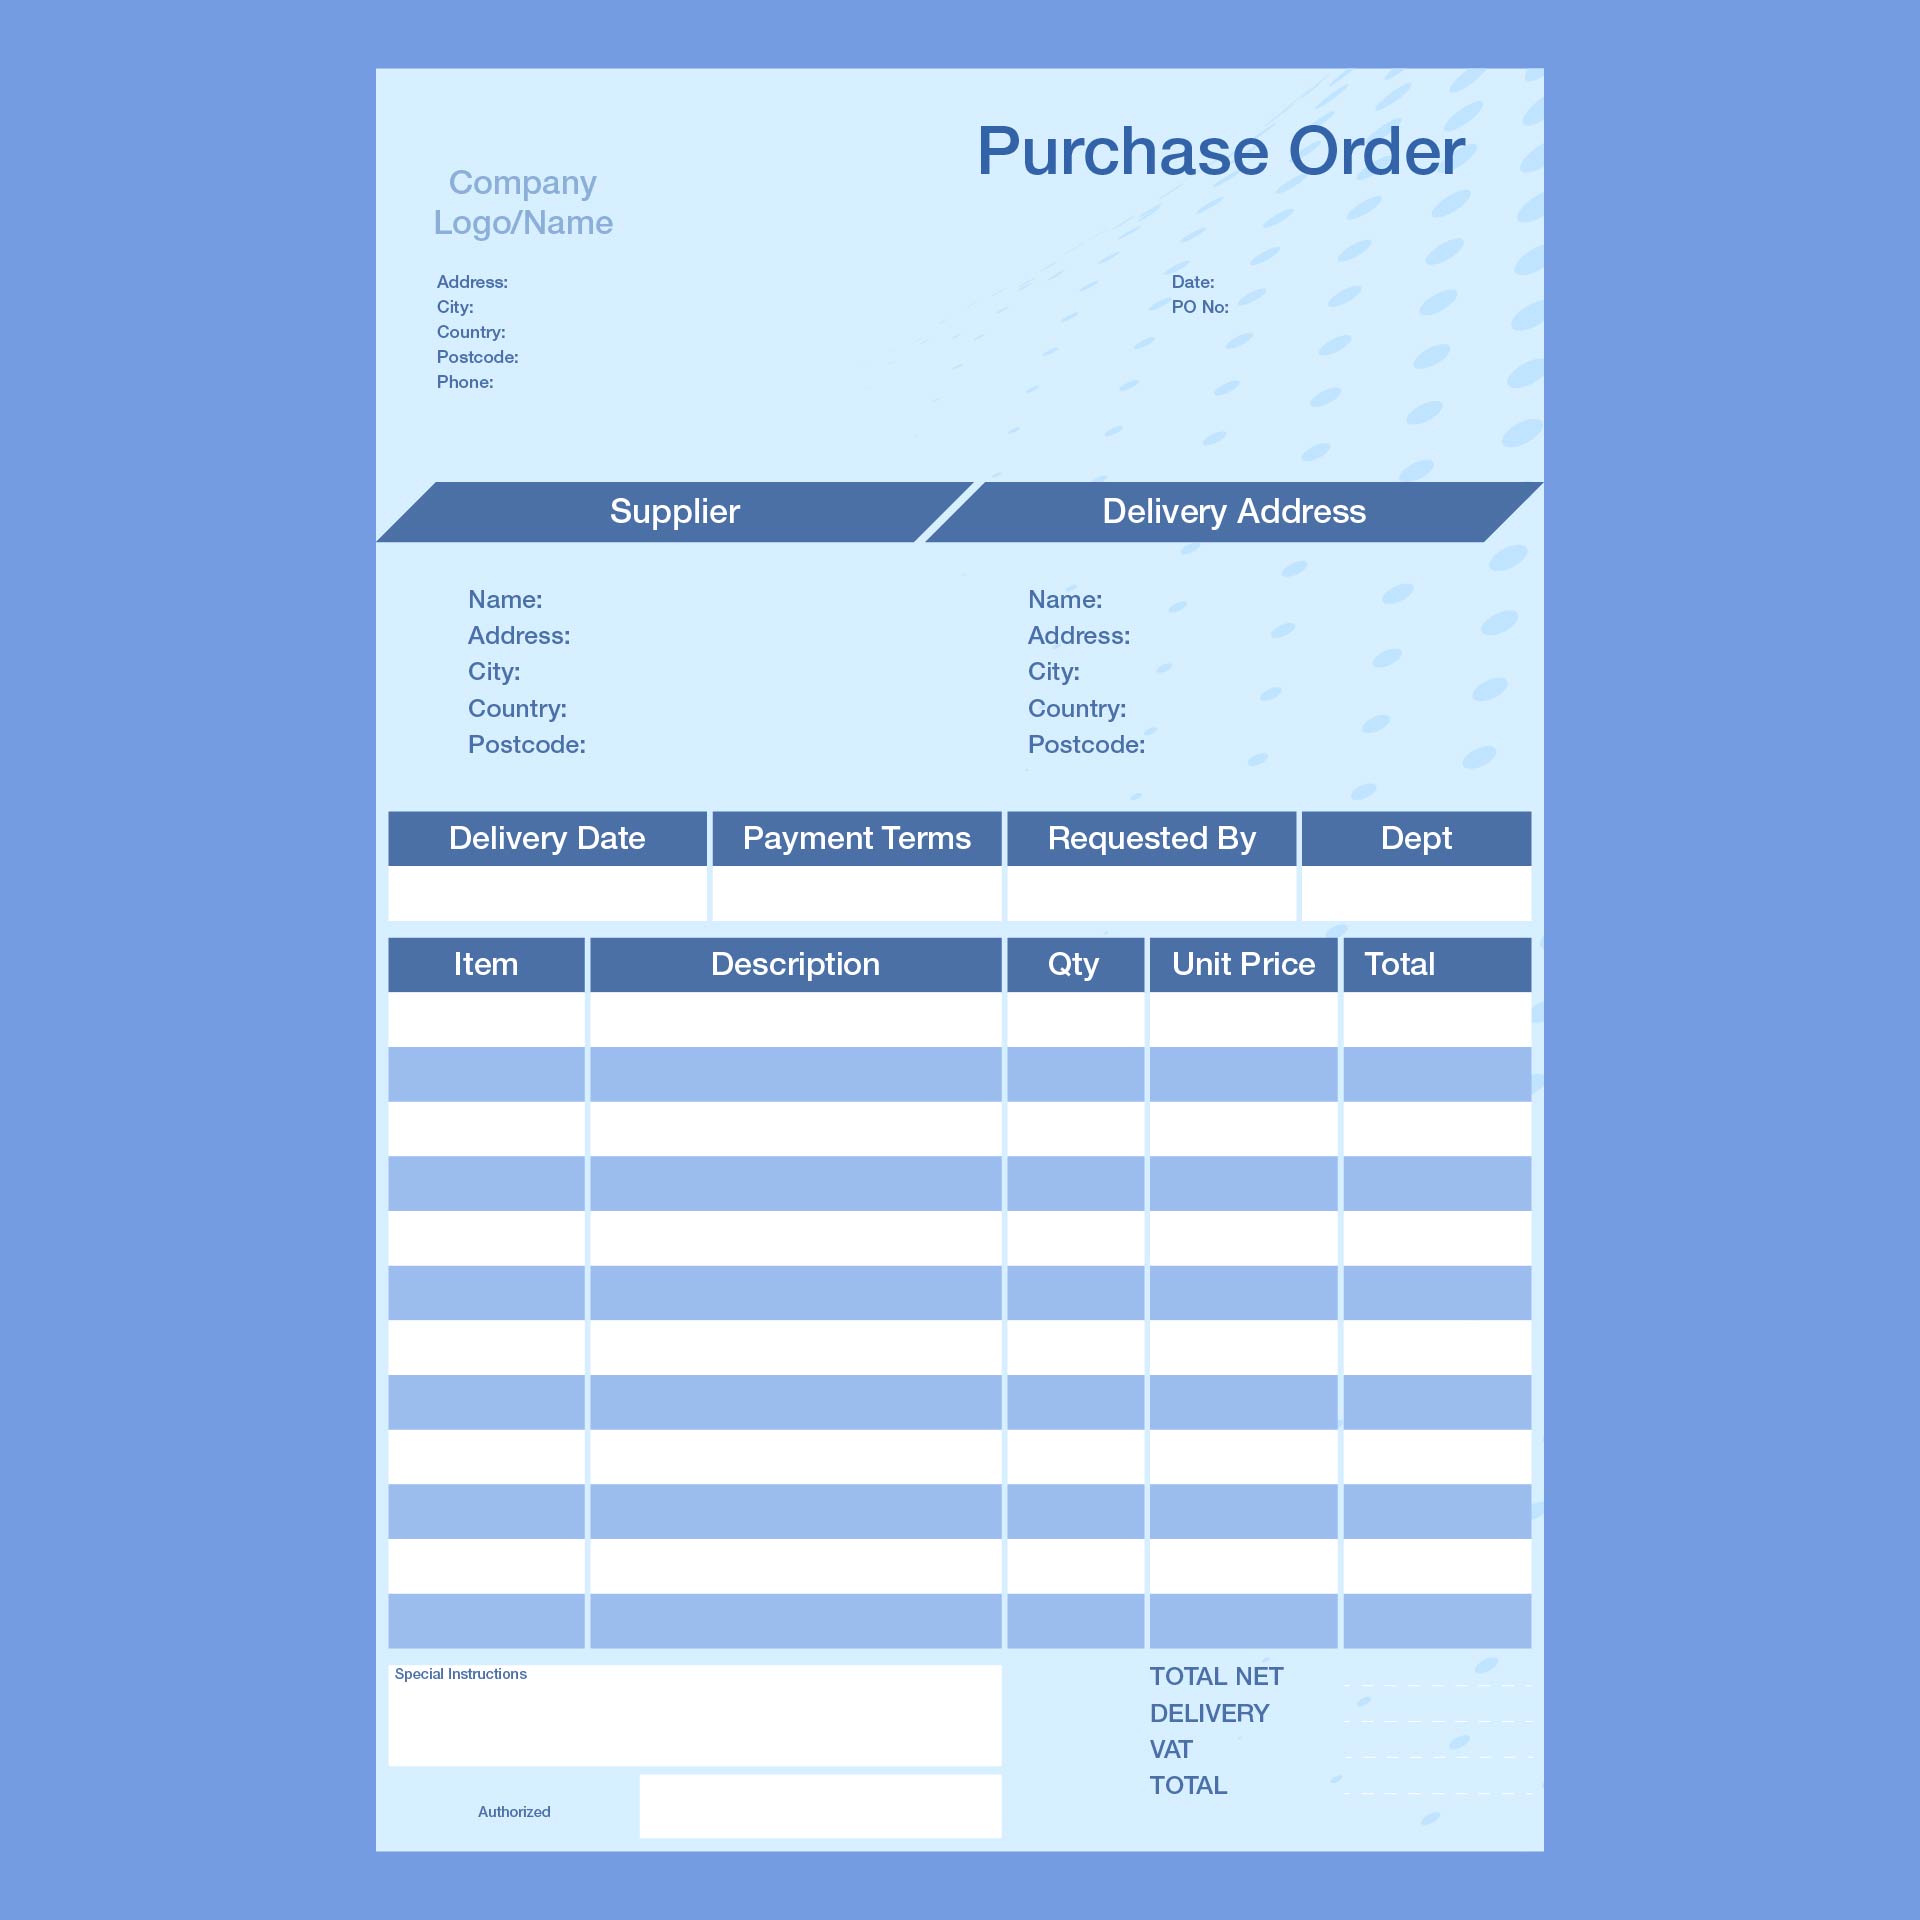 Printable Purchase Order Example for Suppliers